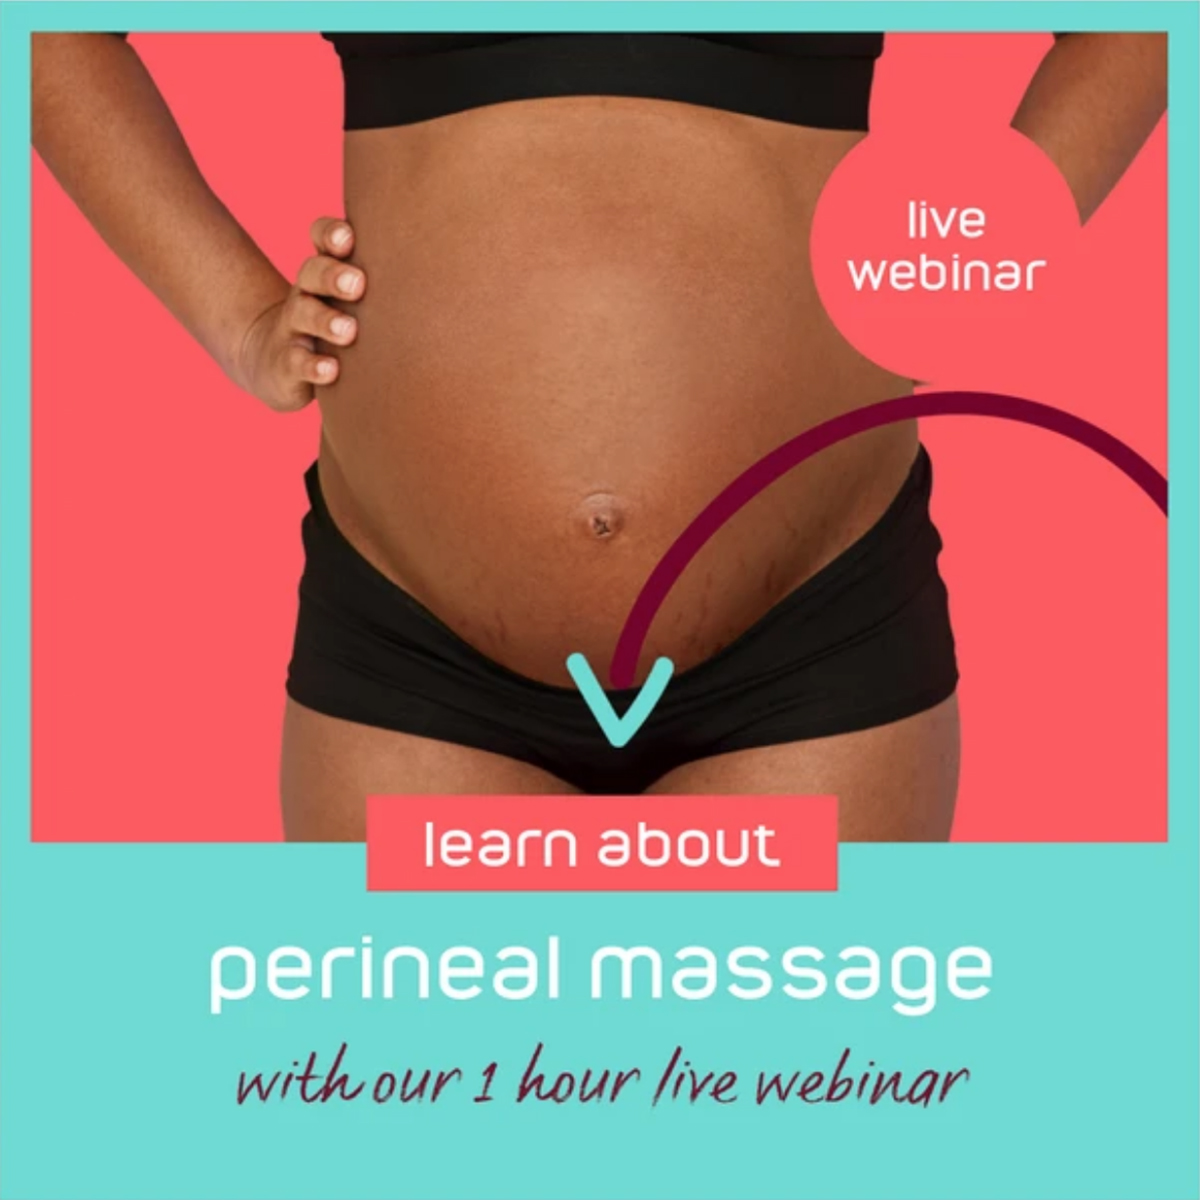 Book your place to learn more about perineal massage in our live webinar